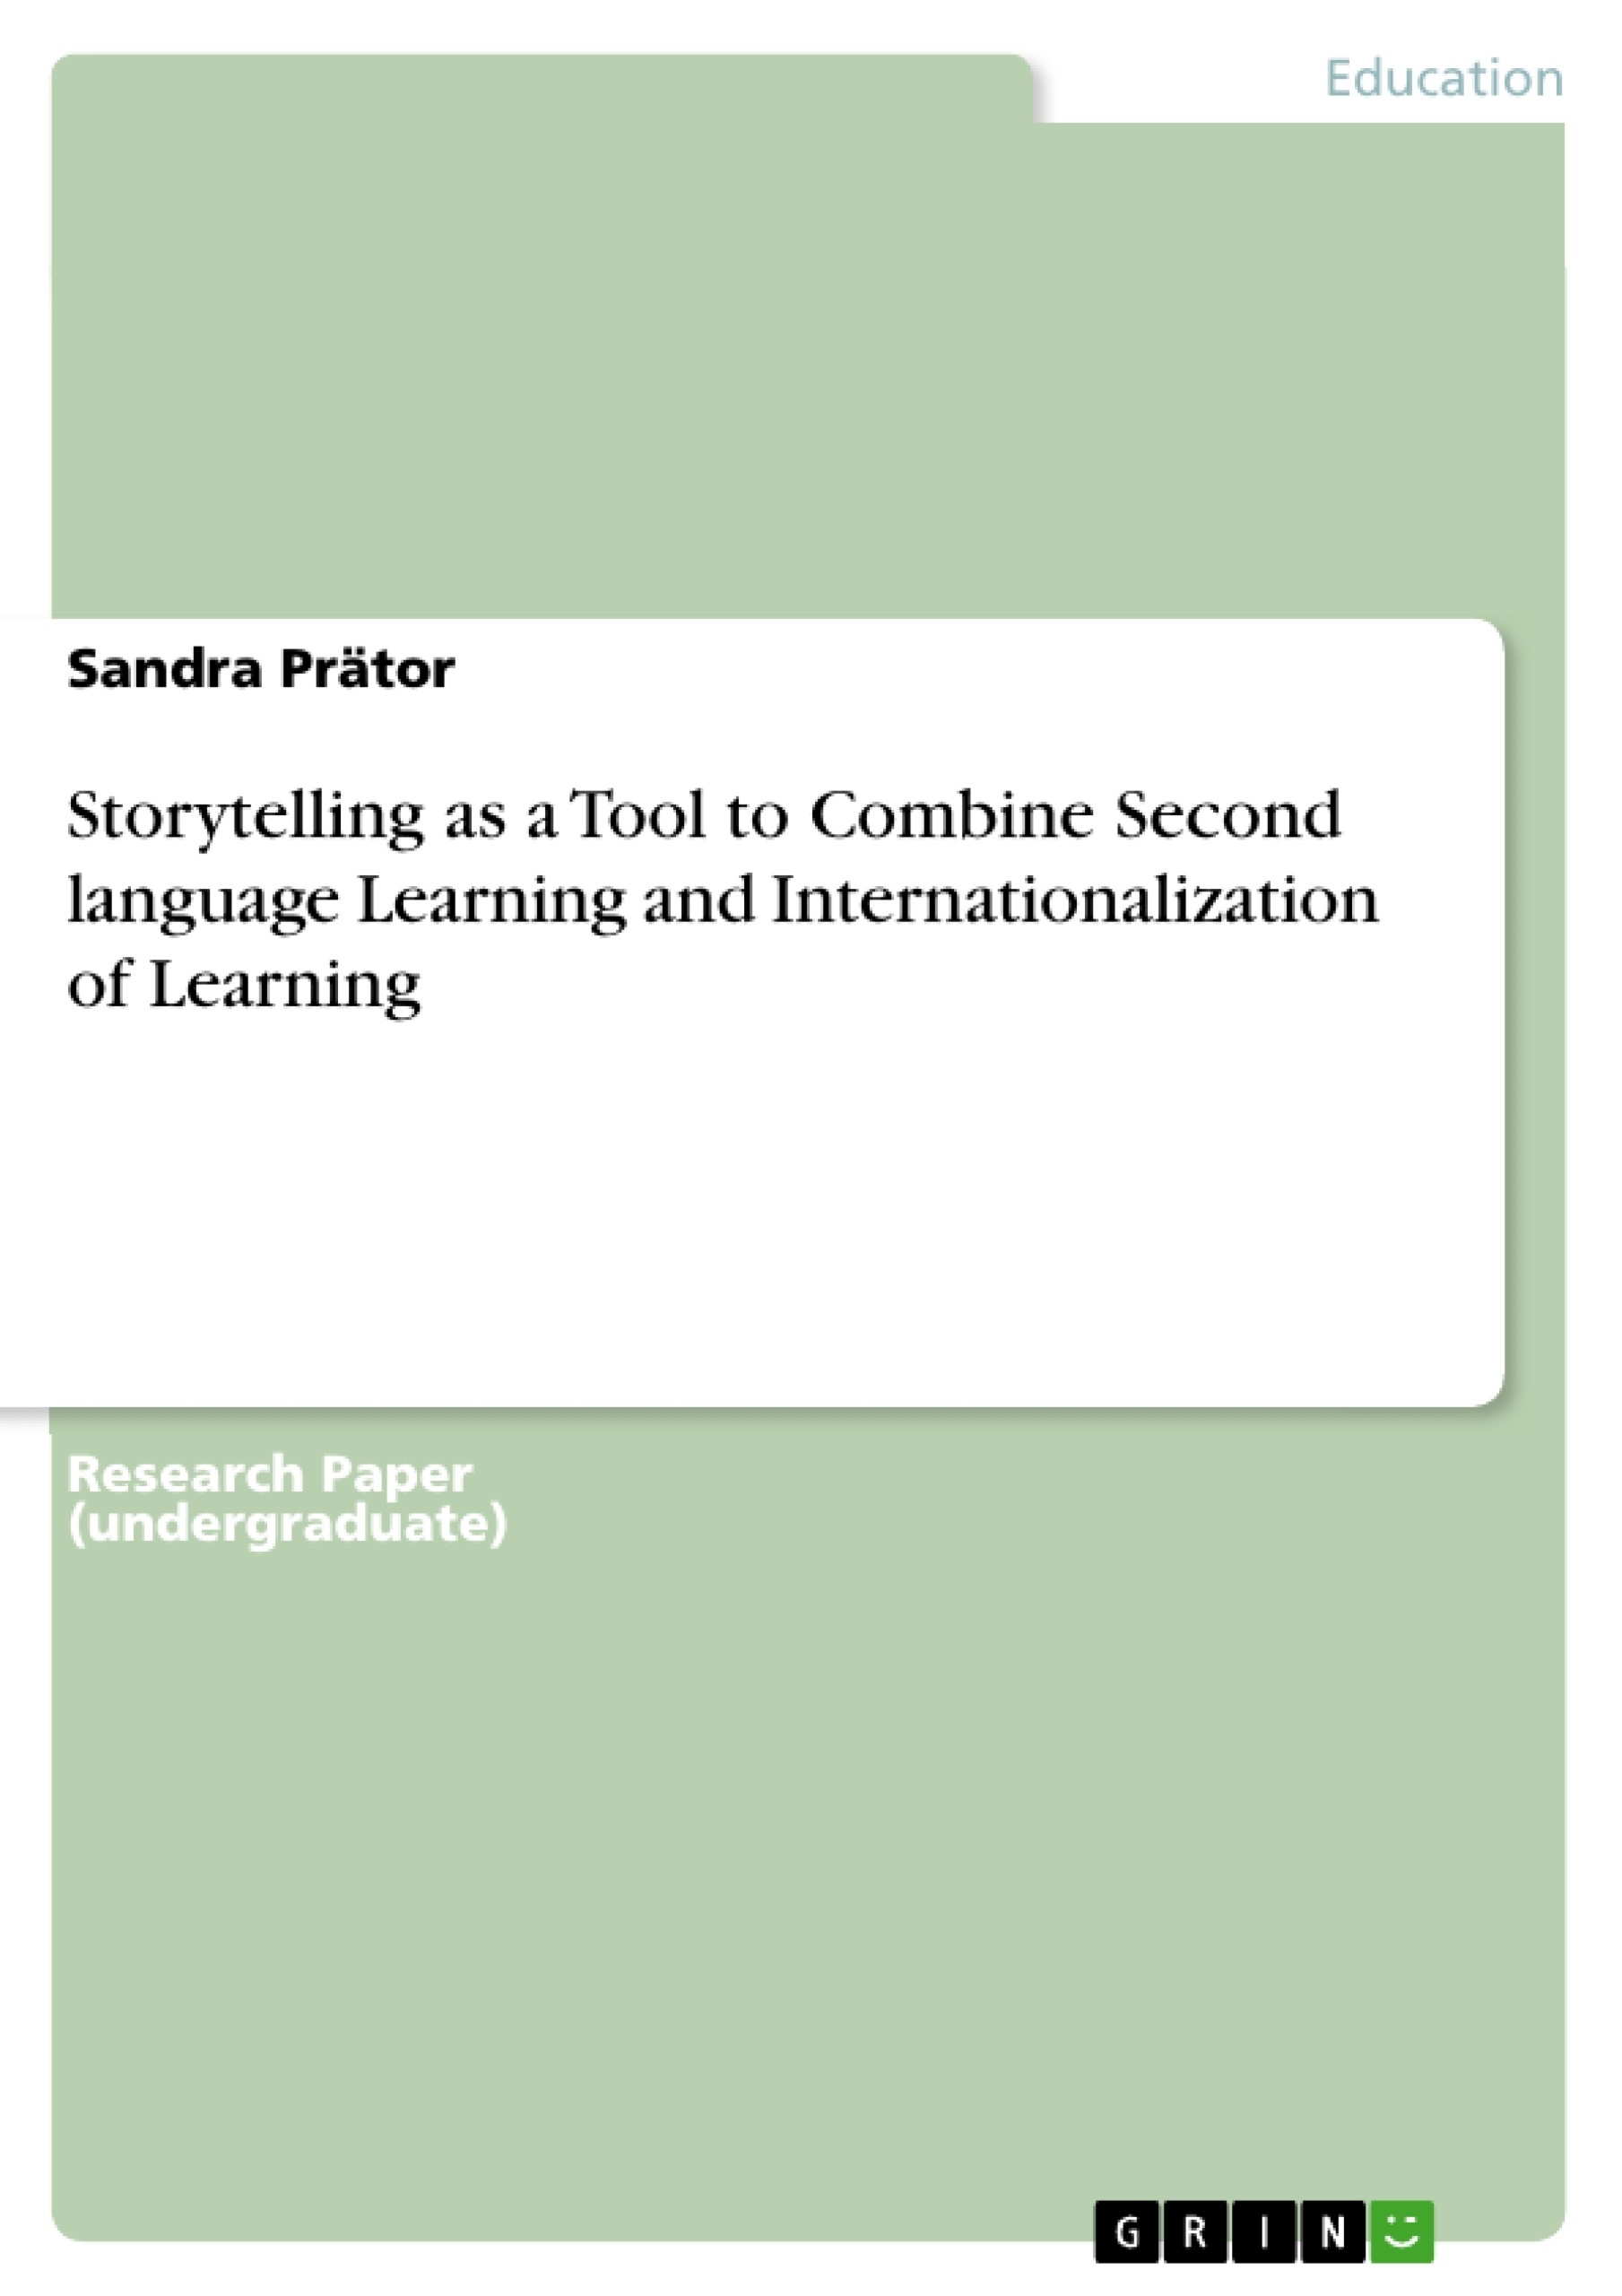 Title: Storytelling as a Tool to Combine Second language Learning and Internationalization of Learning